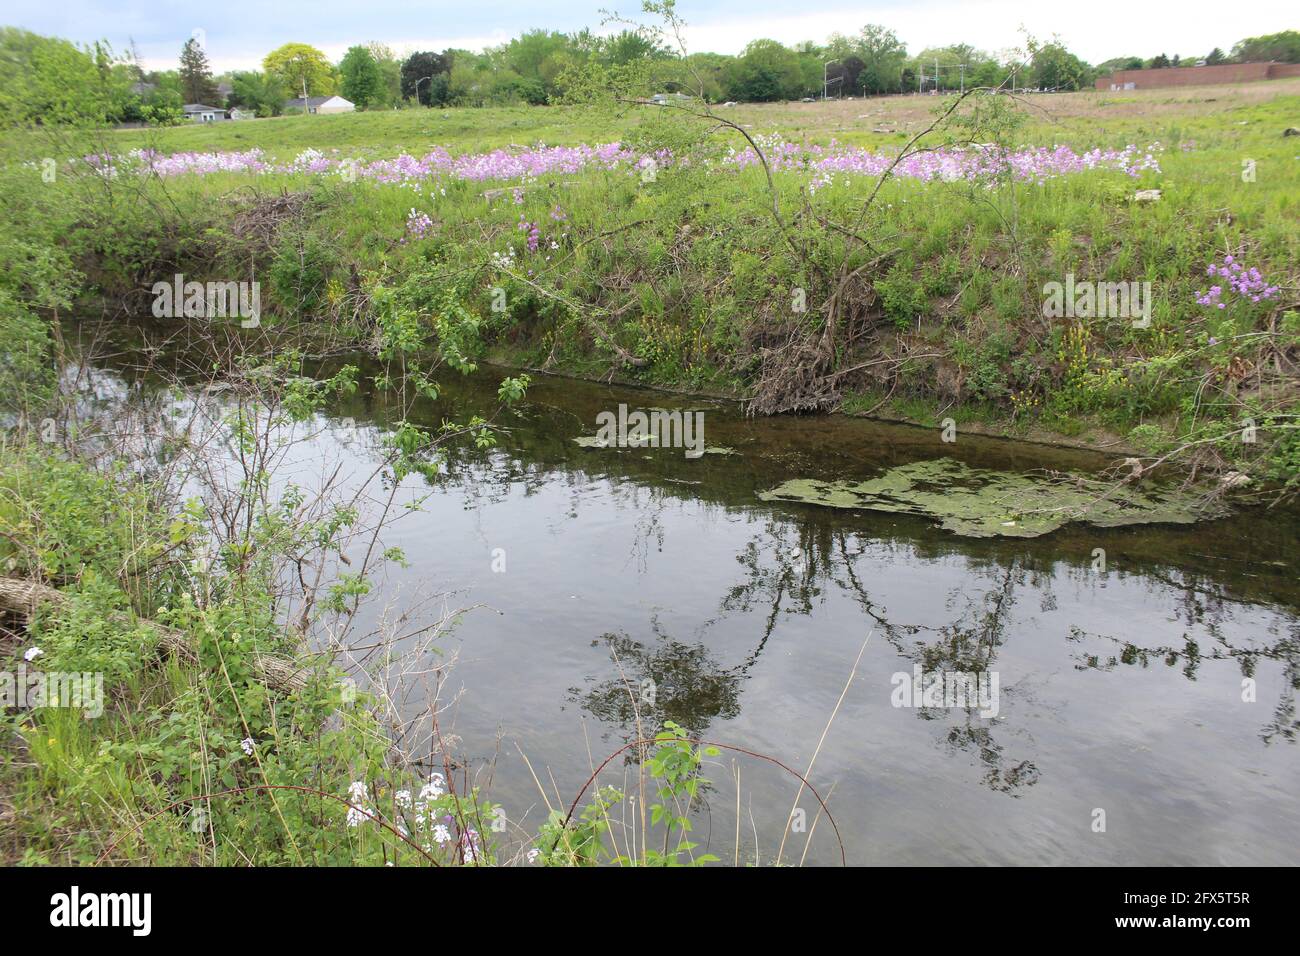 Dame's rocket invasive flowers along both sides of the West Fork of the North Branch of the Chicago River at Somme Prairie in Northbrook, Illinois Stock Photo